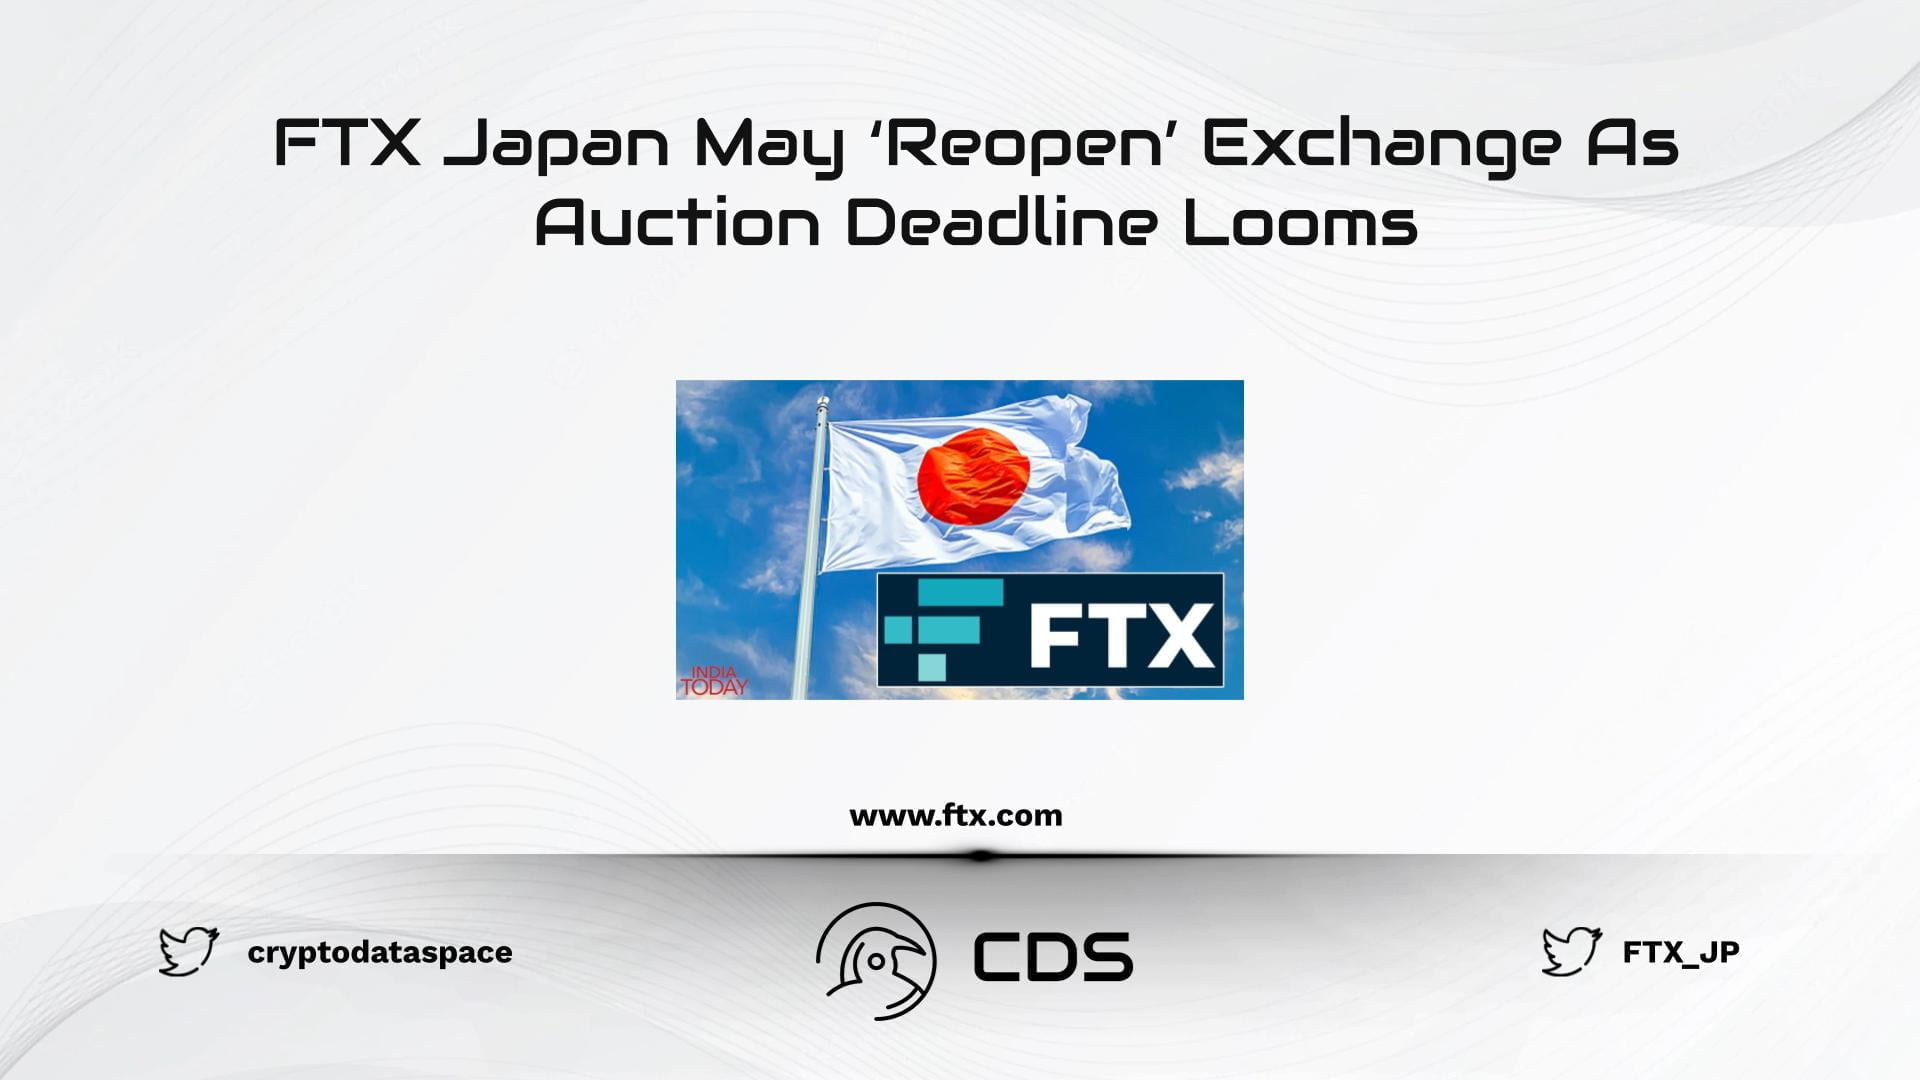 FTX Japan May ‘Reopen’ Exchange As Auction Deadline Looms